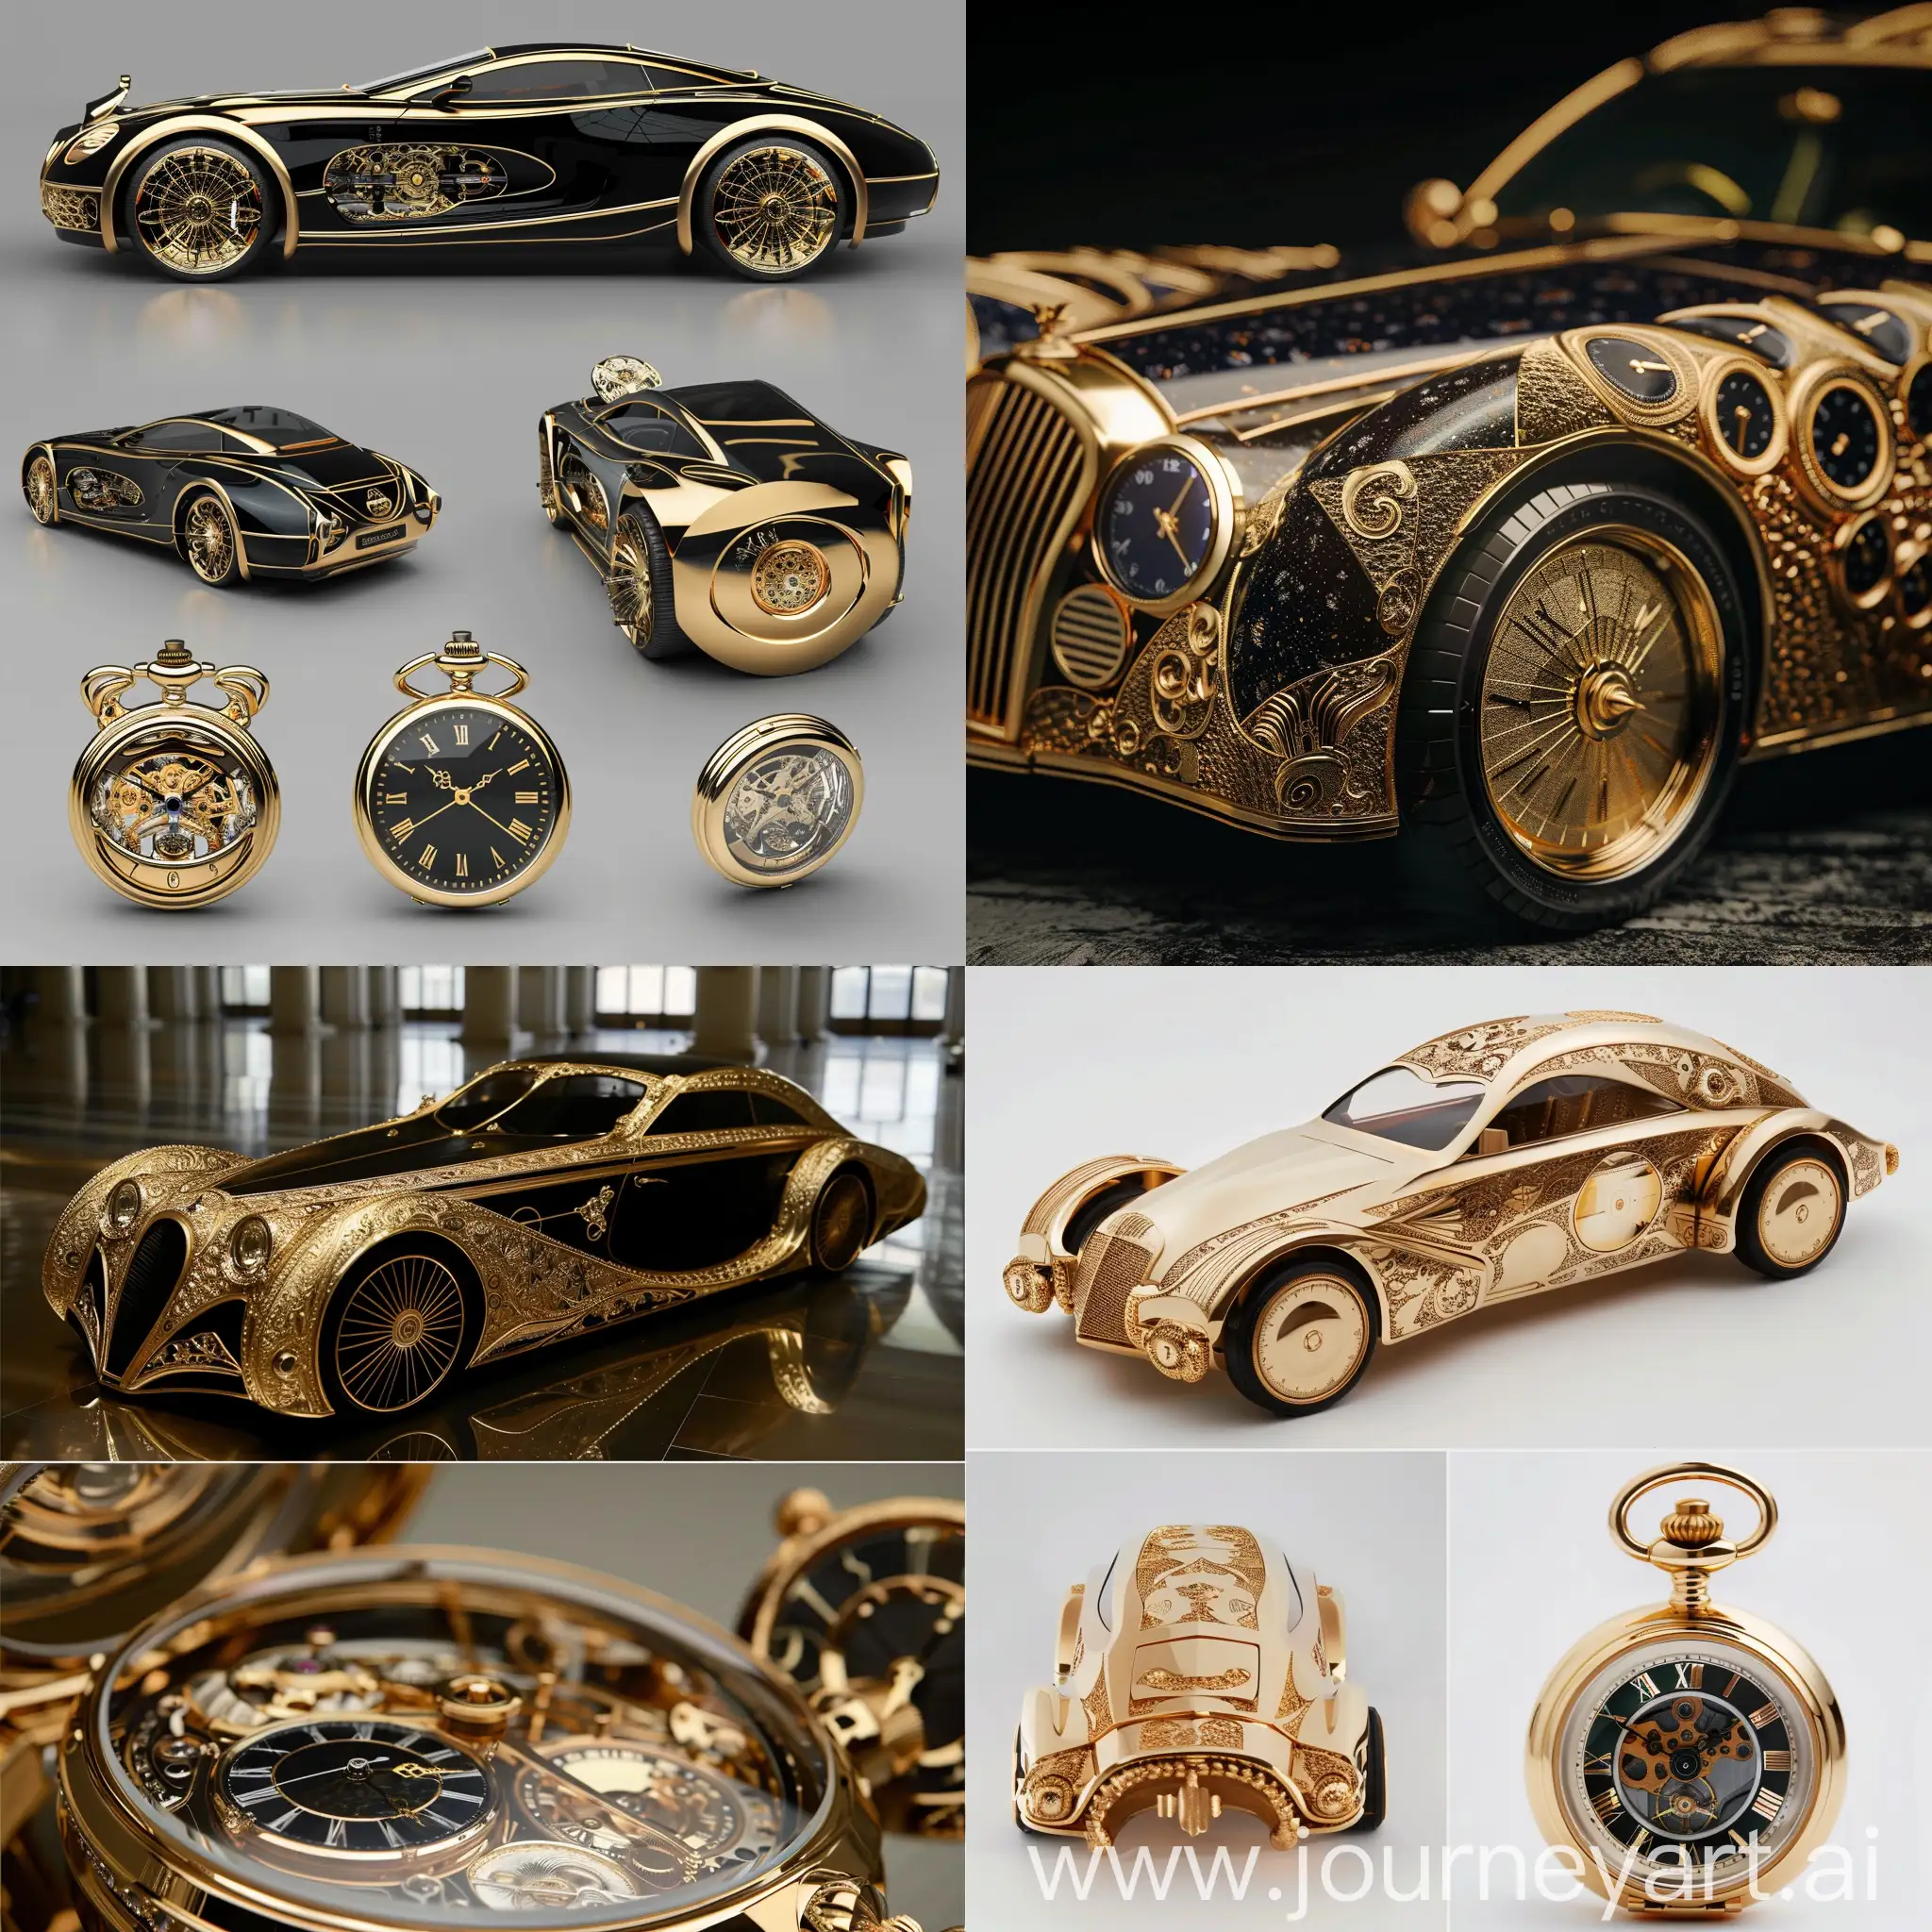 Luxurious-Car-Design-Inspired-by-Pocket-Watches-Gold-and-BeauxArts